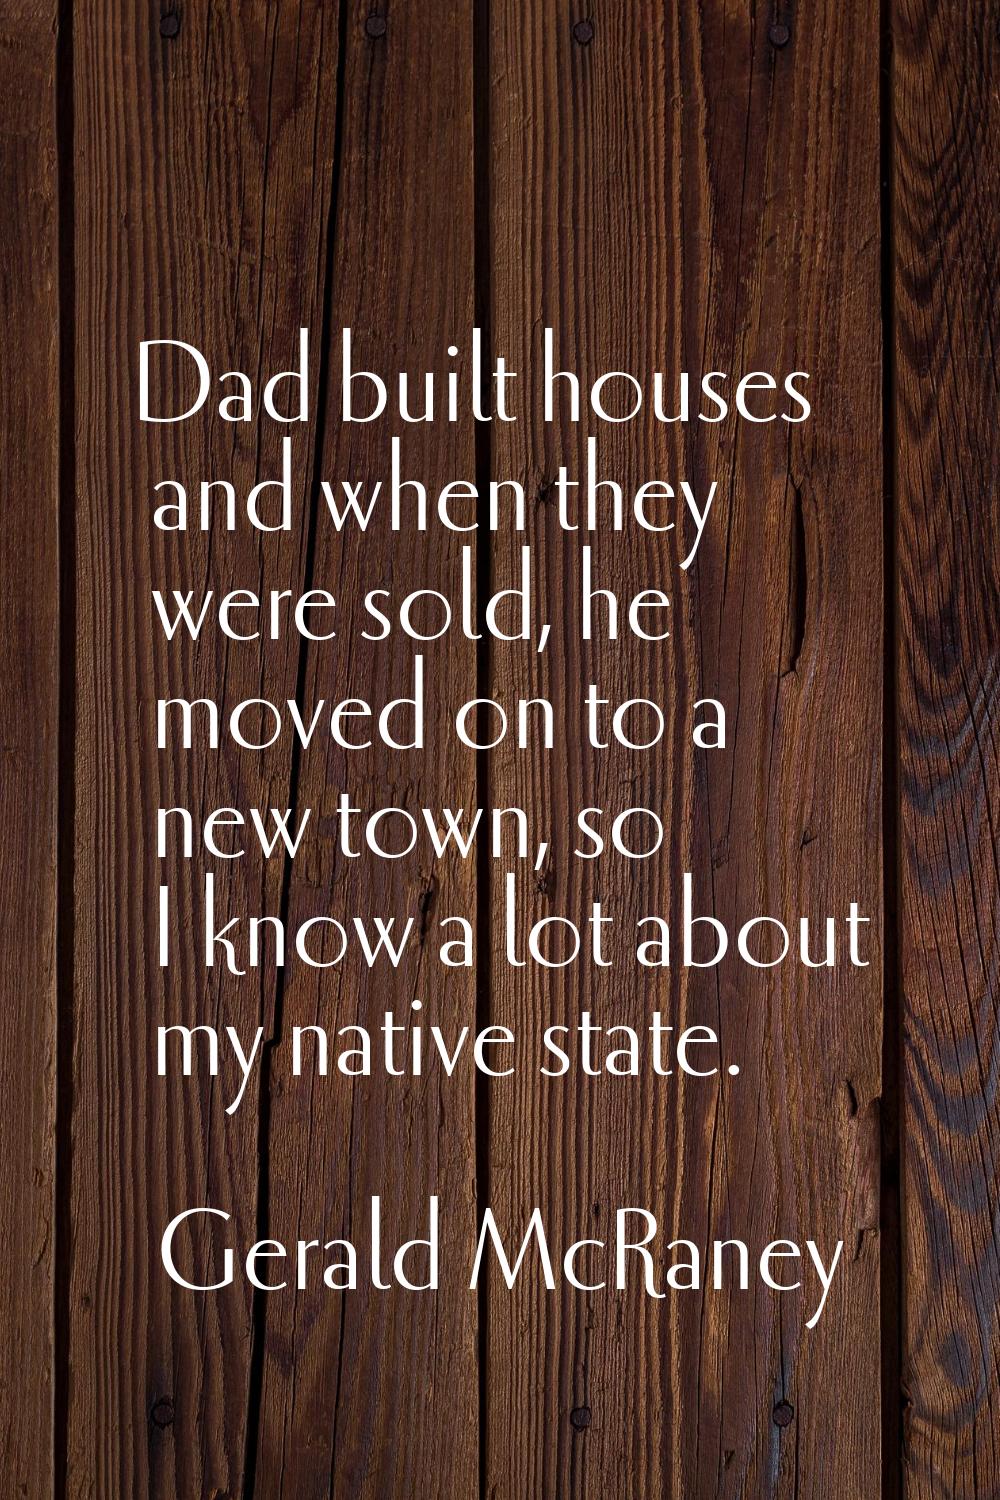 Dad built houses and when they were sold, he moved on to a new town, so I know a lot about my nativ